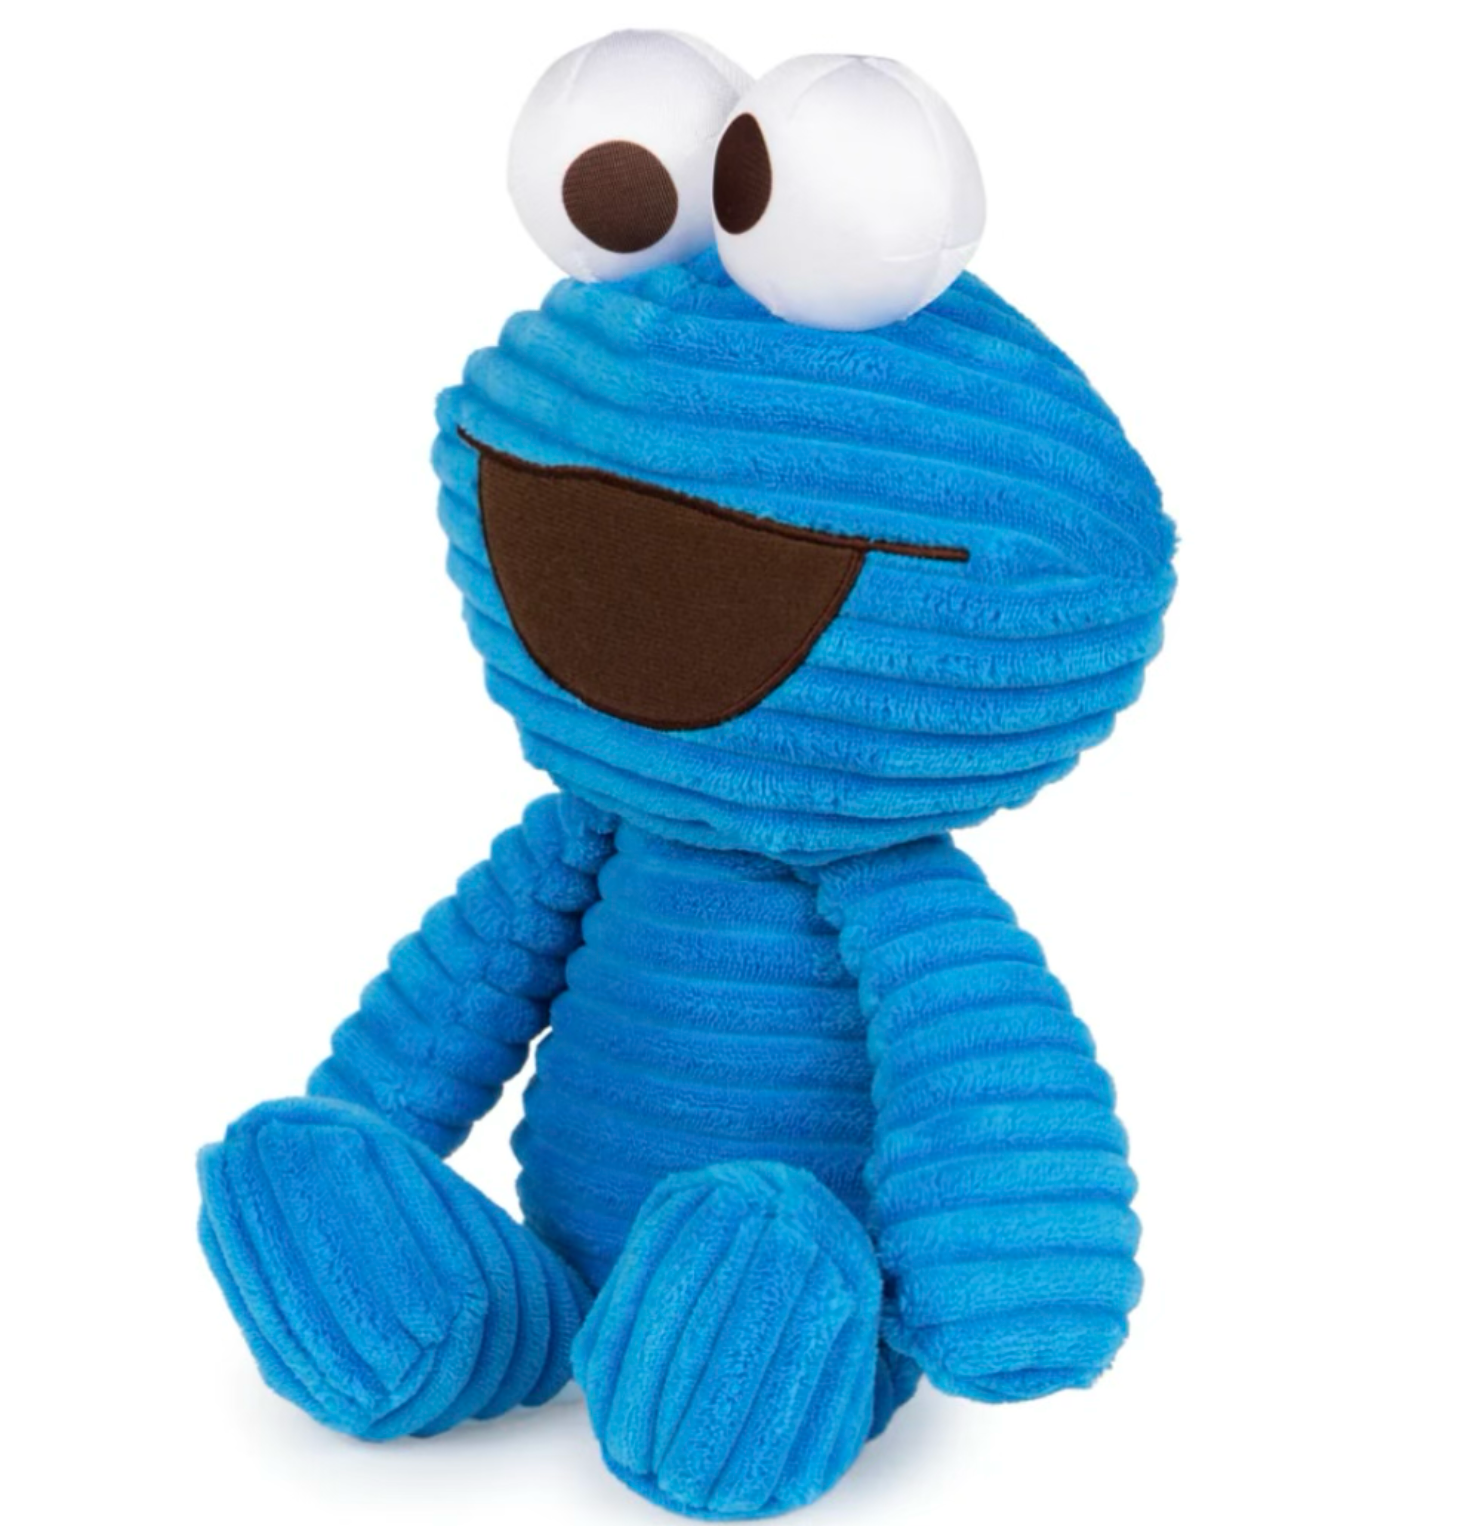 Cuddly Cookie Monster